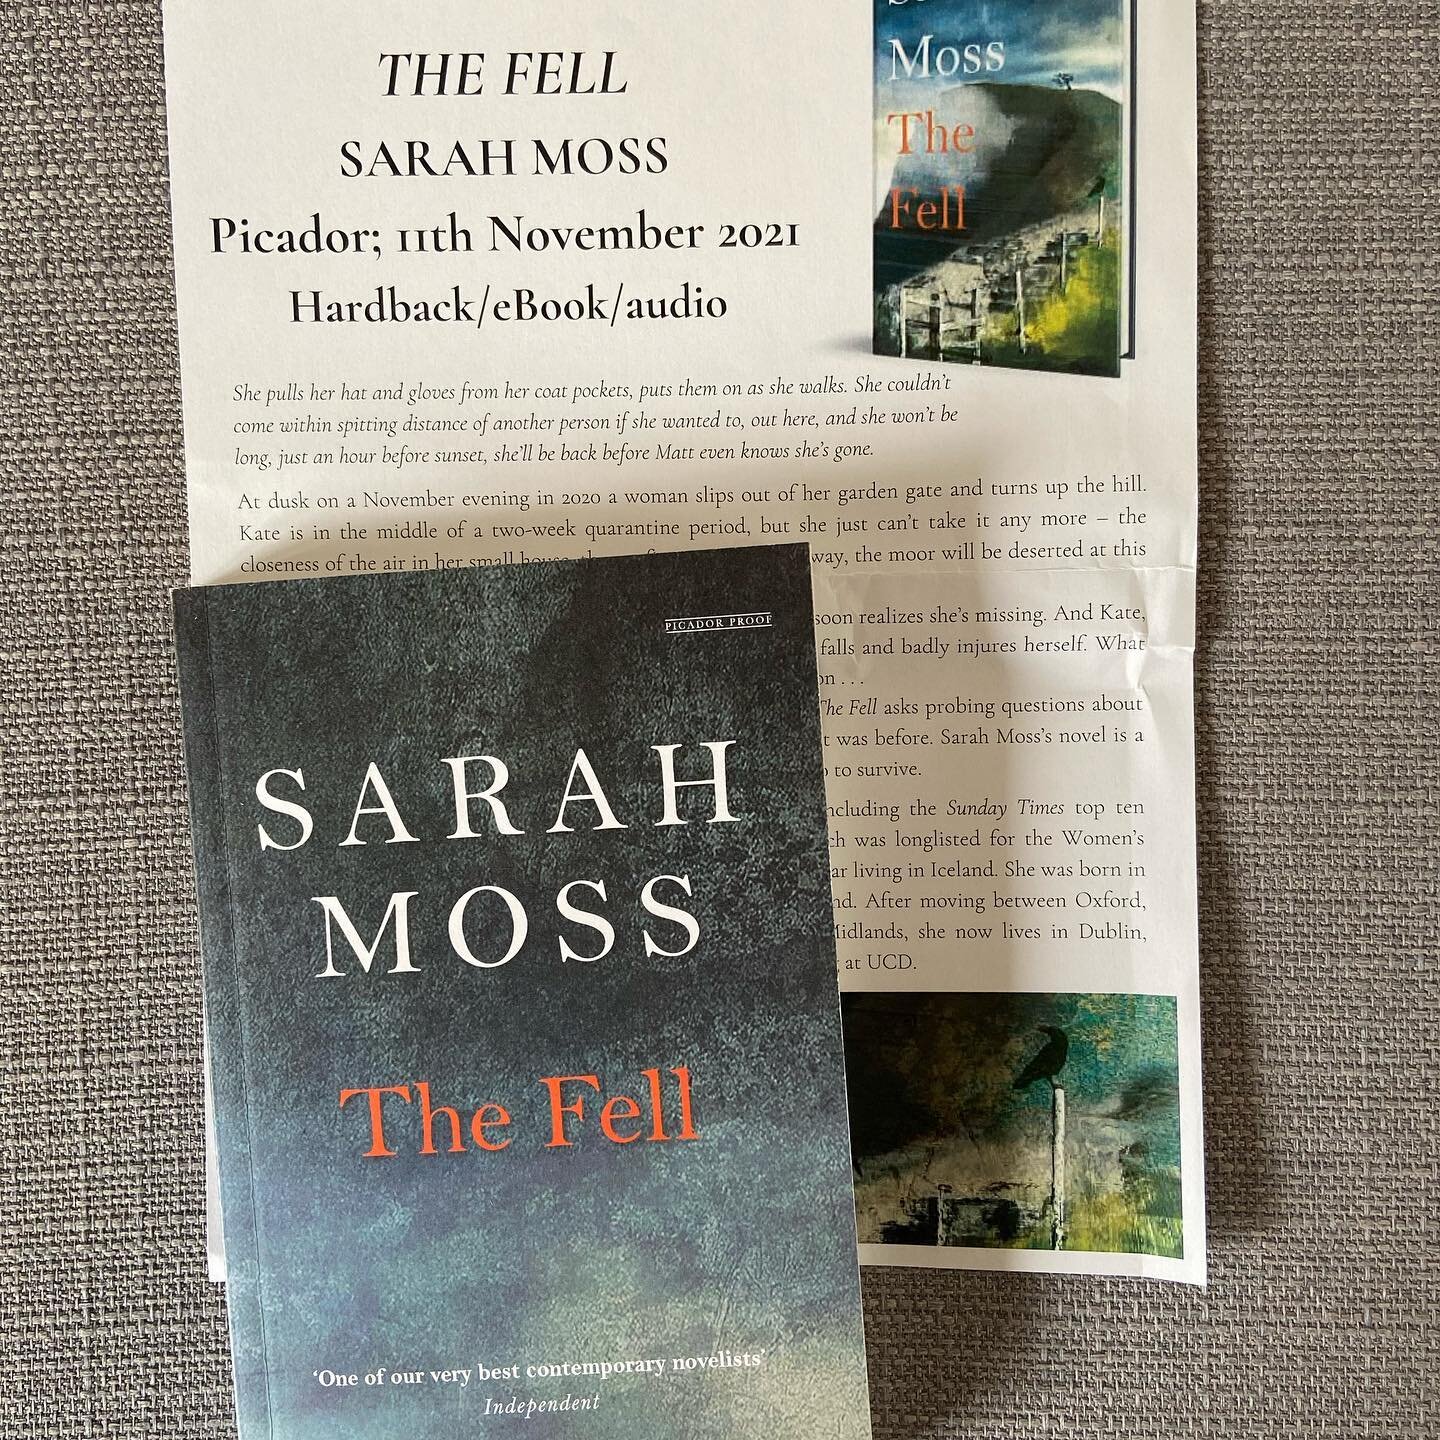 I was so excited when this dropped through my door, having seen it all over Twitter. Thank you so much for #TheFell, @picadorbooks. I cannot wait to read it.